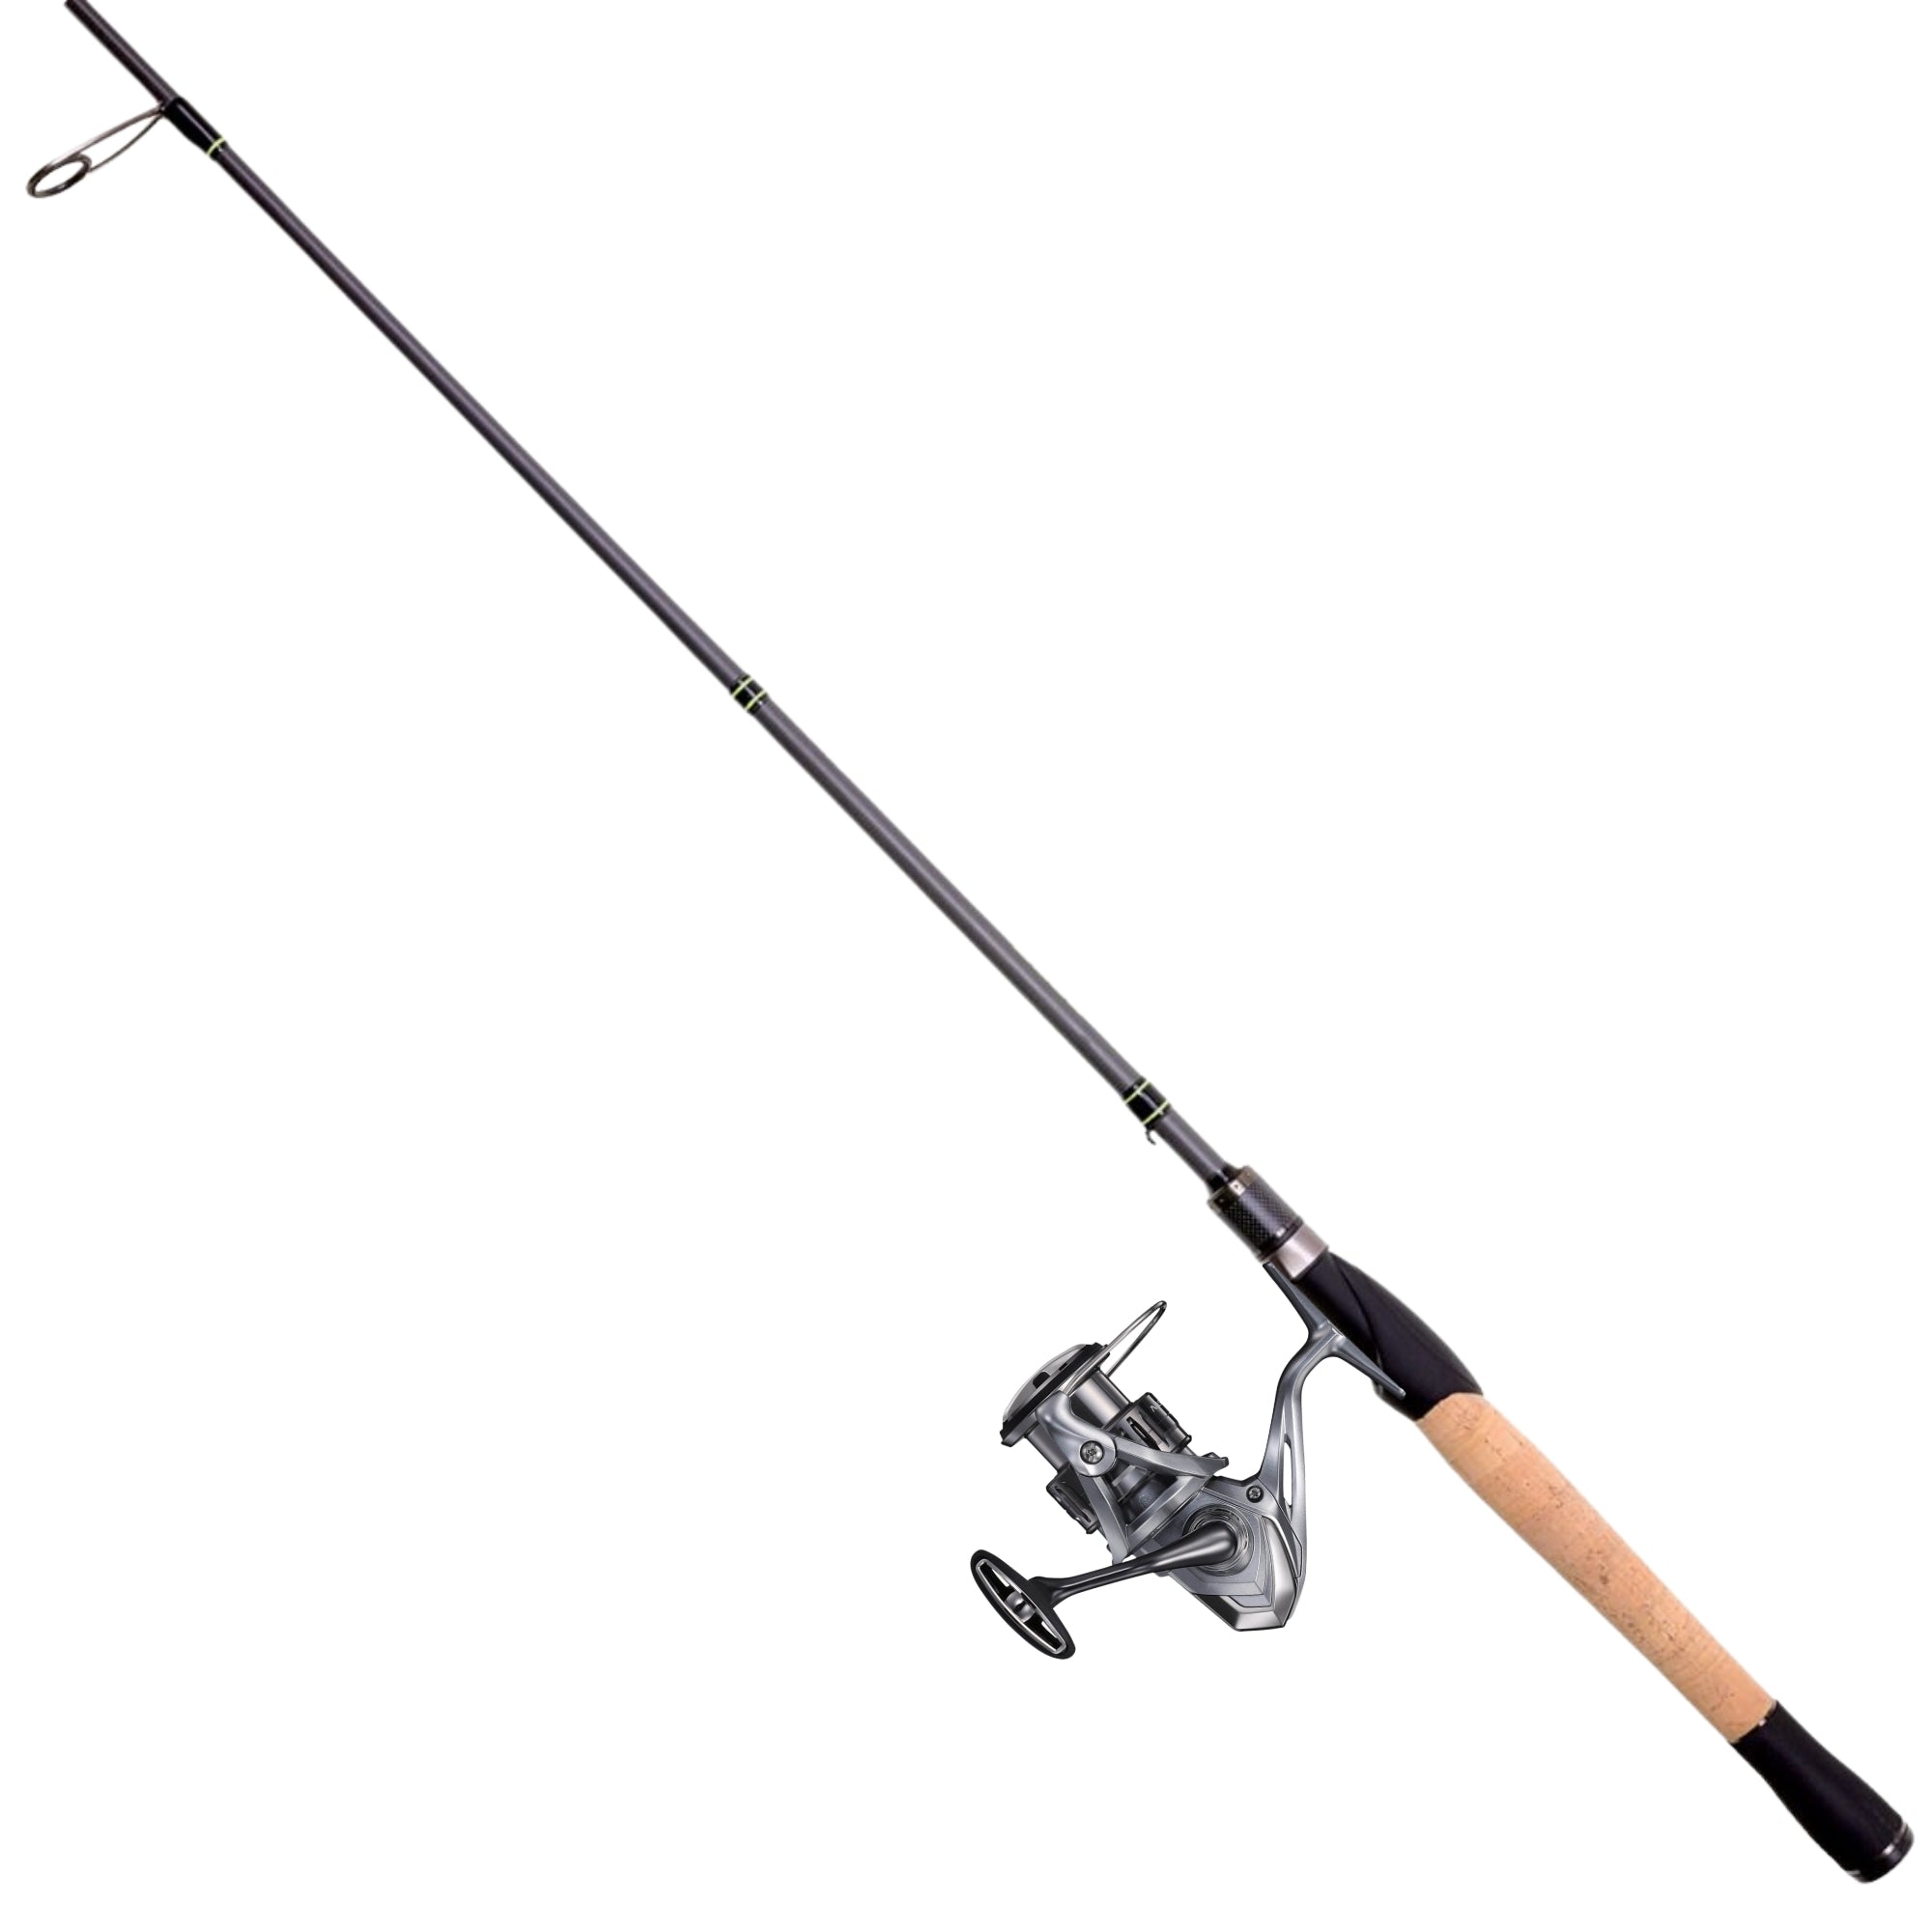 Eagle Claw Wright&McGill Tony Roach Power Ice Fishing Spinning Combo WMTRI  CHOOSE YOUR MODEL!